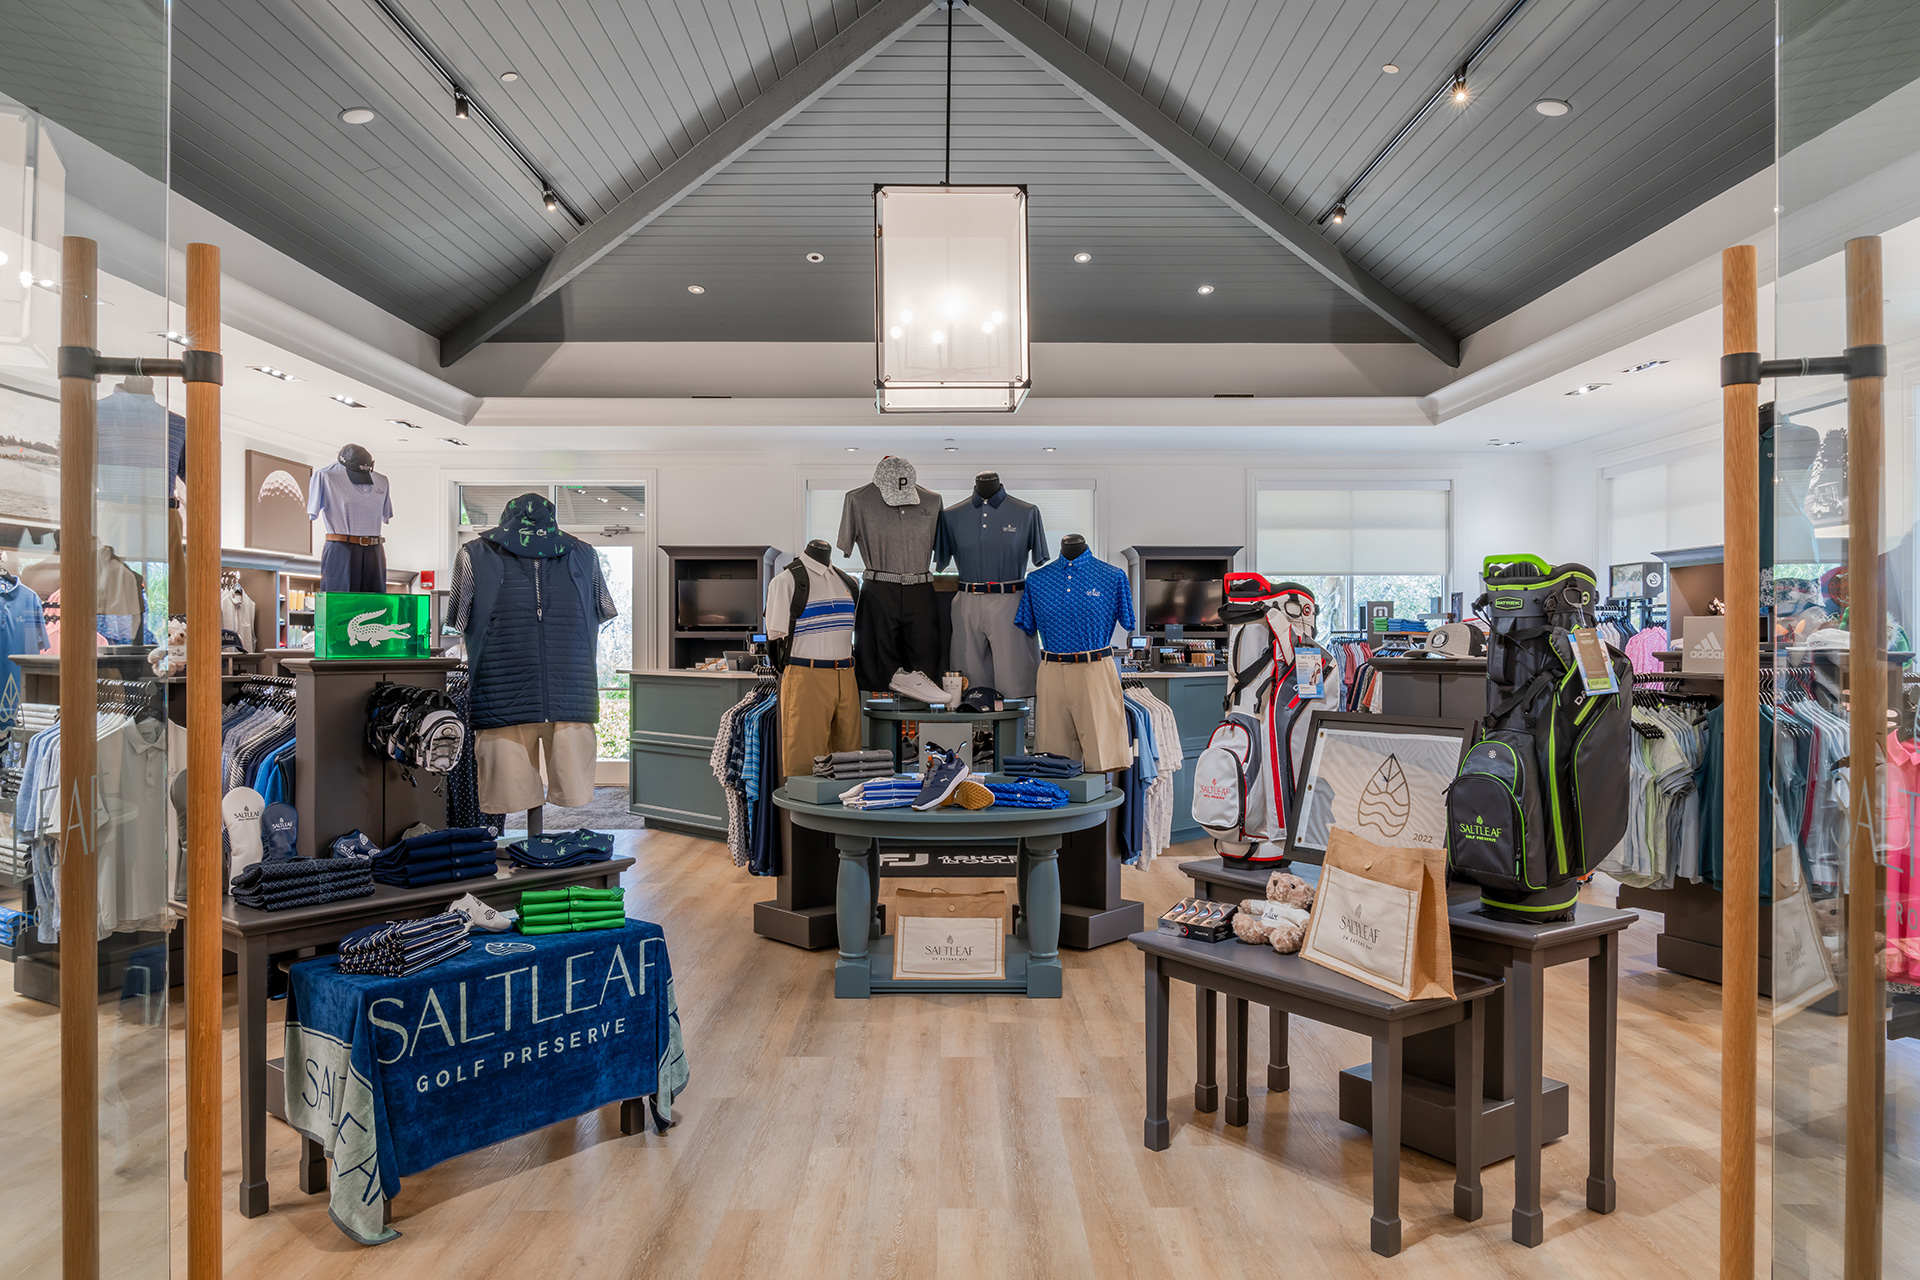 Bonita Springs' Saltleaf Golf Preserve offers a wide selection of merchandise for golf enthusiasts.